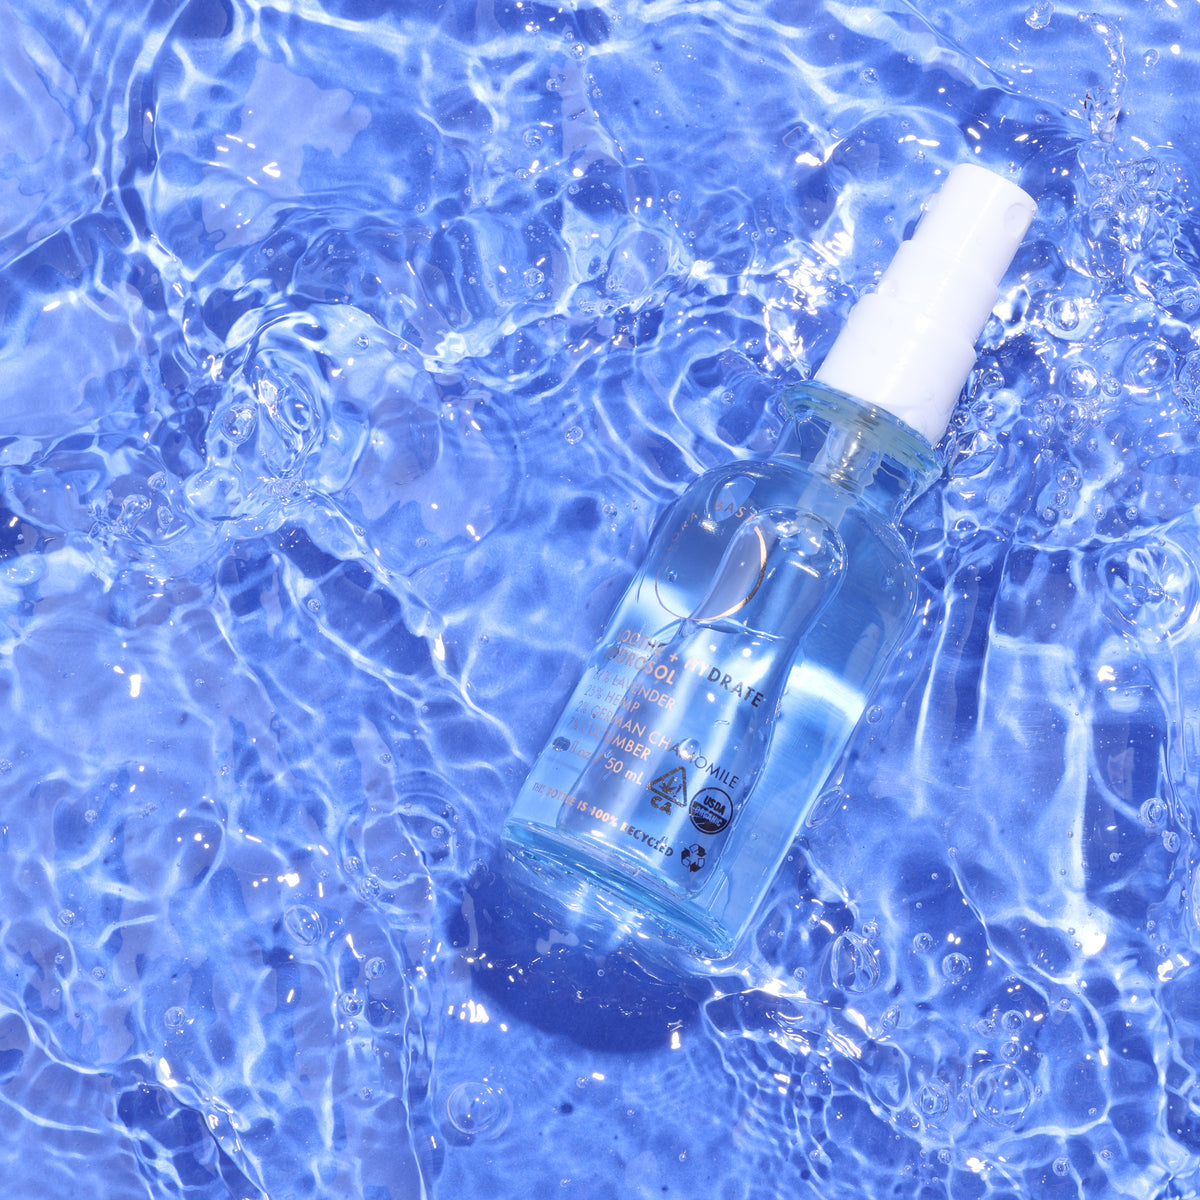 Clean, all-natural face mist for refreshing hydration 